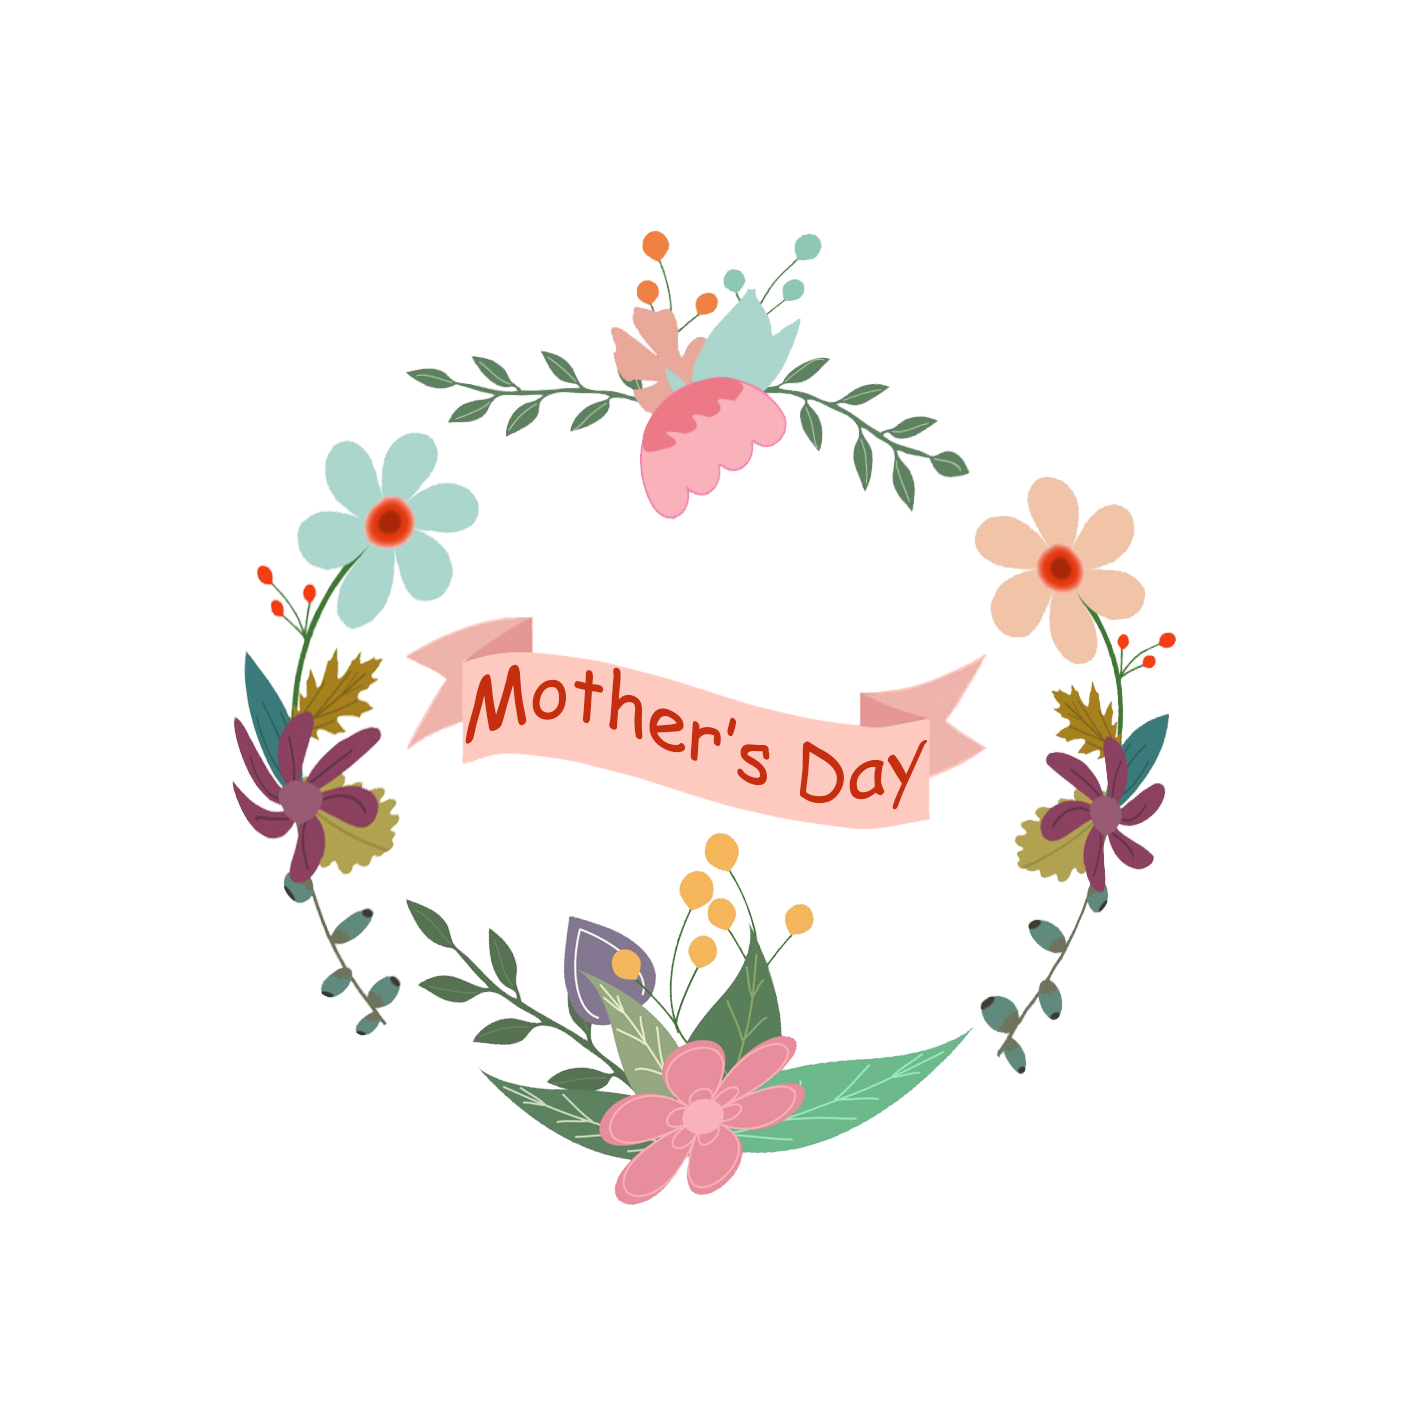 Happy Mother's Day Colorful Flowers Edible Cake Topper Image ABPID55795